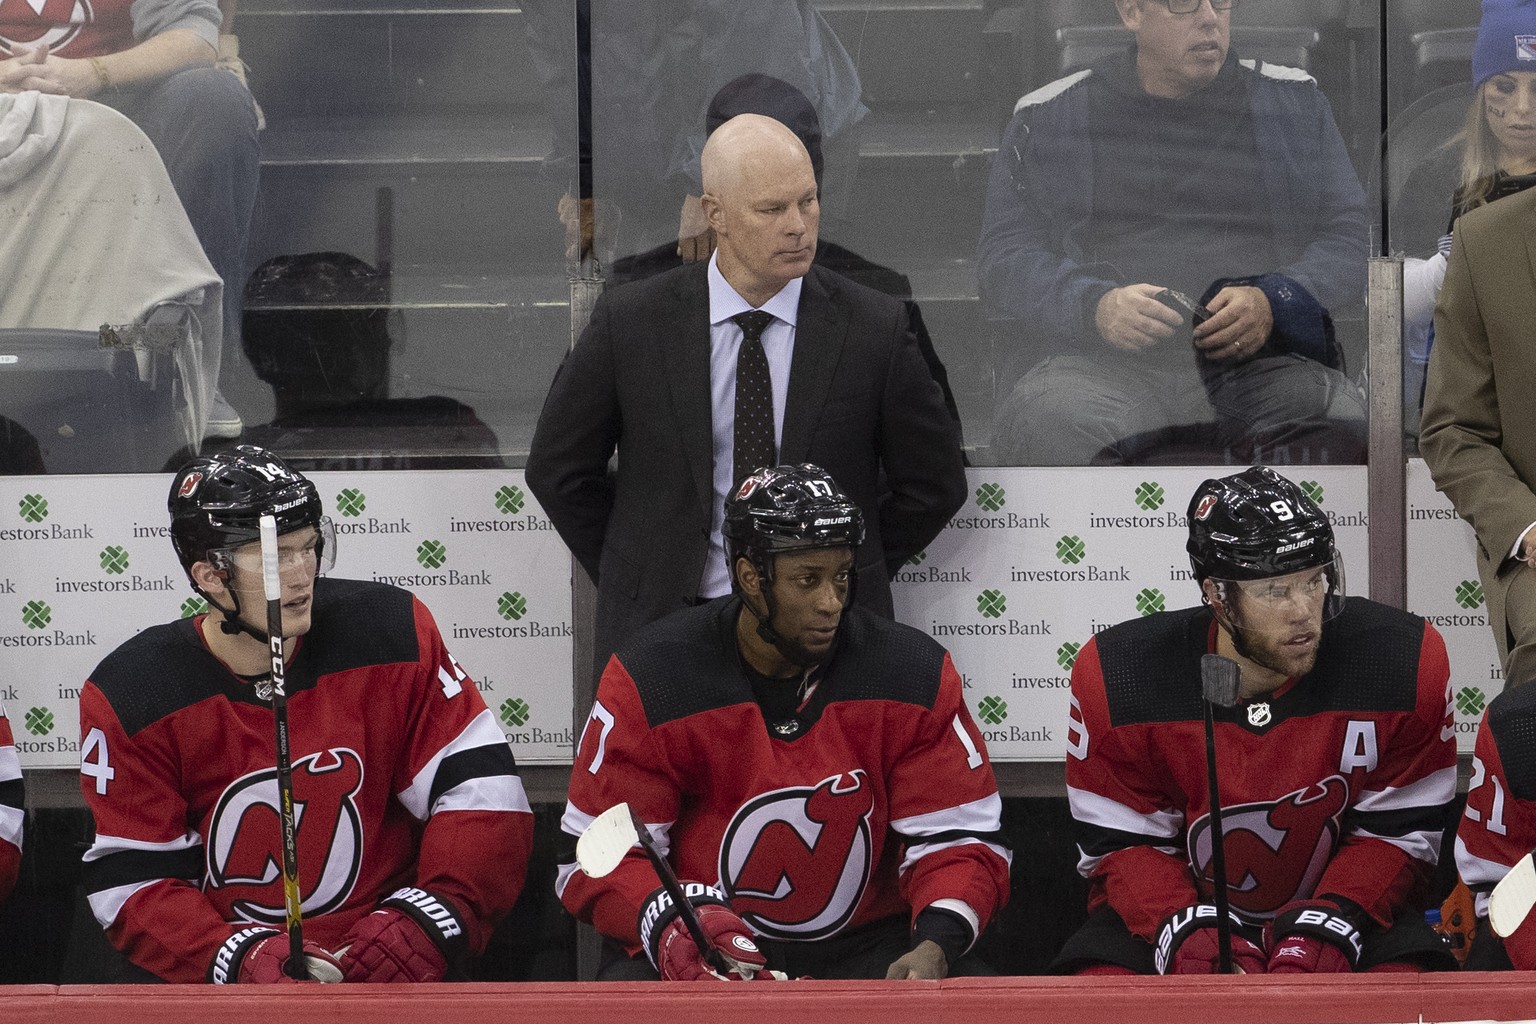 New Jersey Devils coach John Hynes, center, watches the team play the New York Rangers during the third period of a preseason NHL hockey game Friday, Sept. 20, 2019, in Newark, N.J. (AP Photo/Mary Alt ...